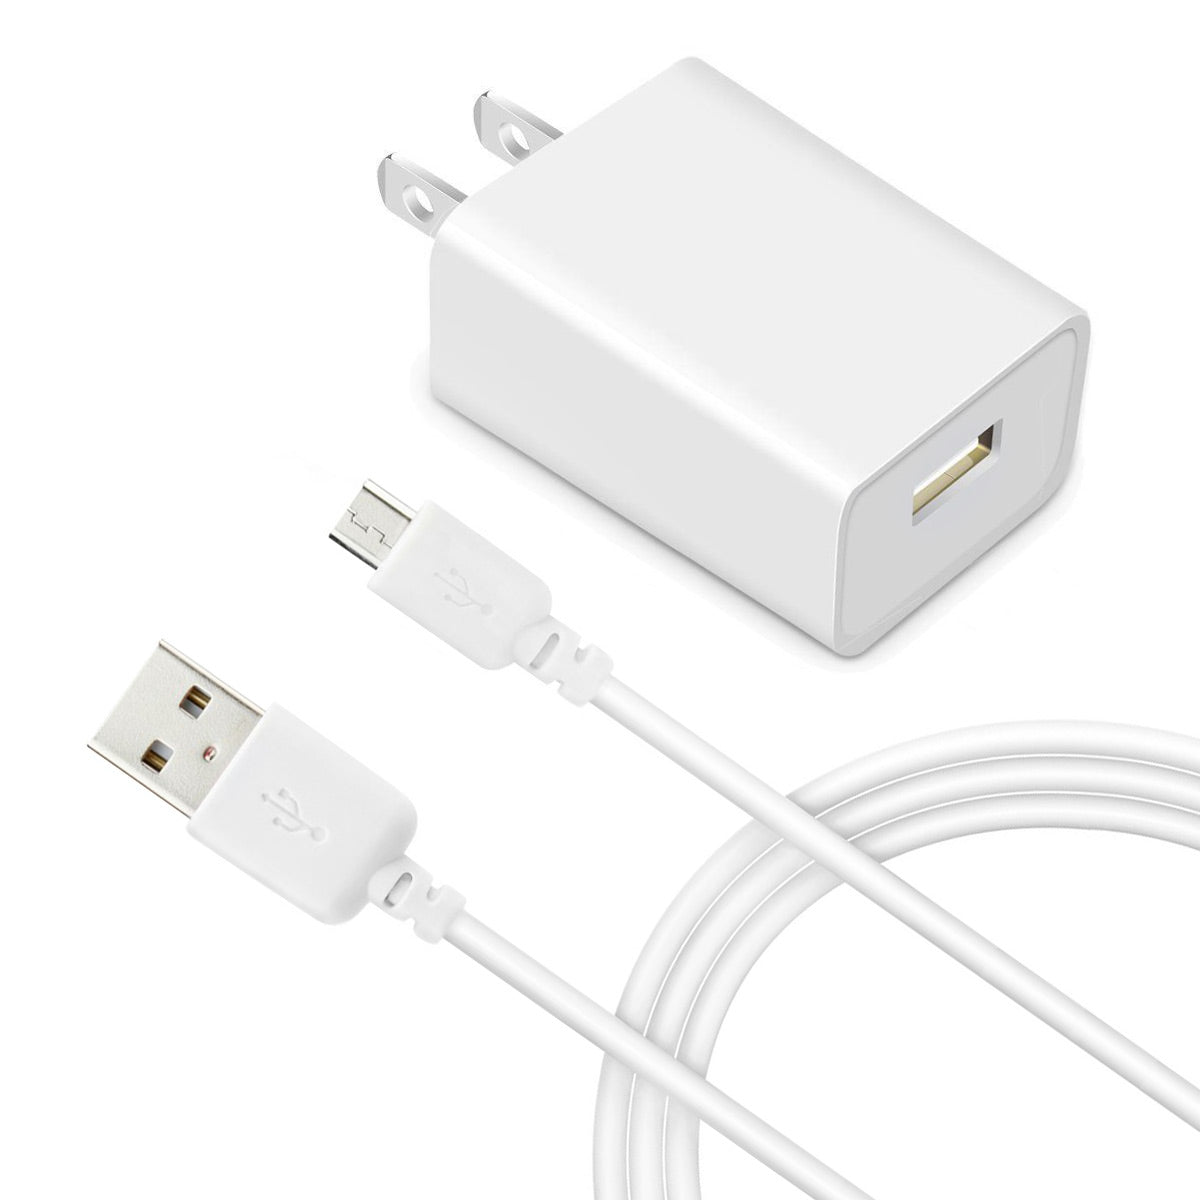 Micro USB Charger for Sleep8 - DISCONTINUED